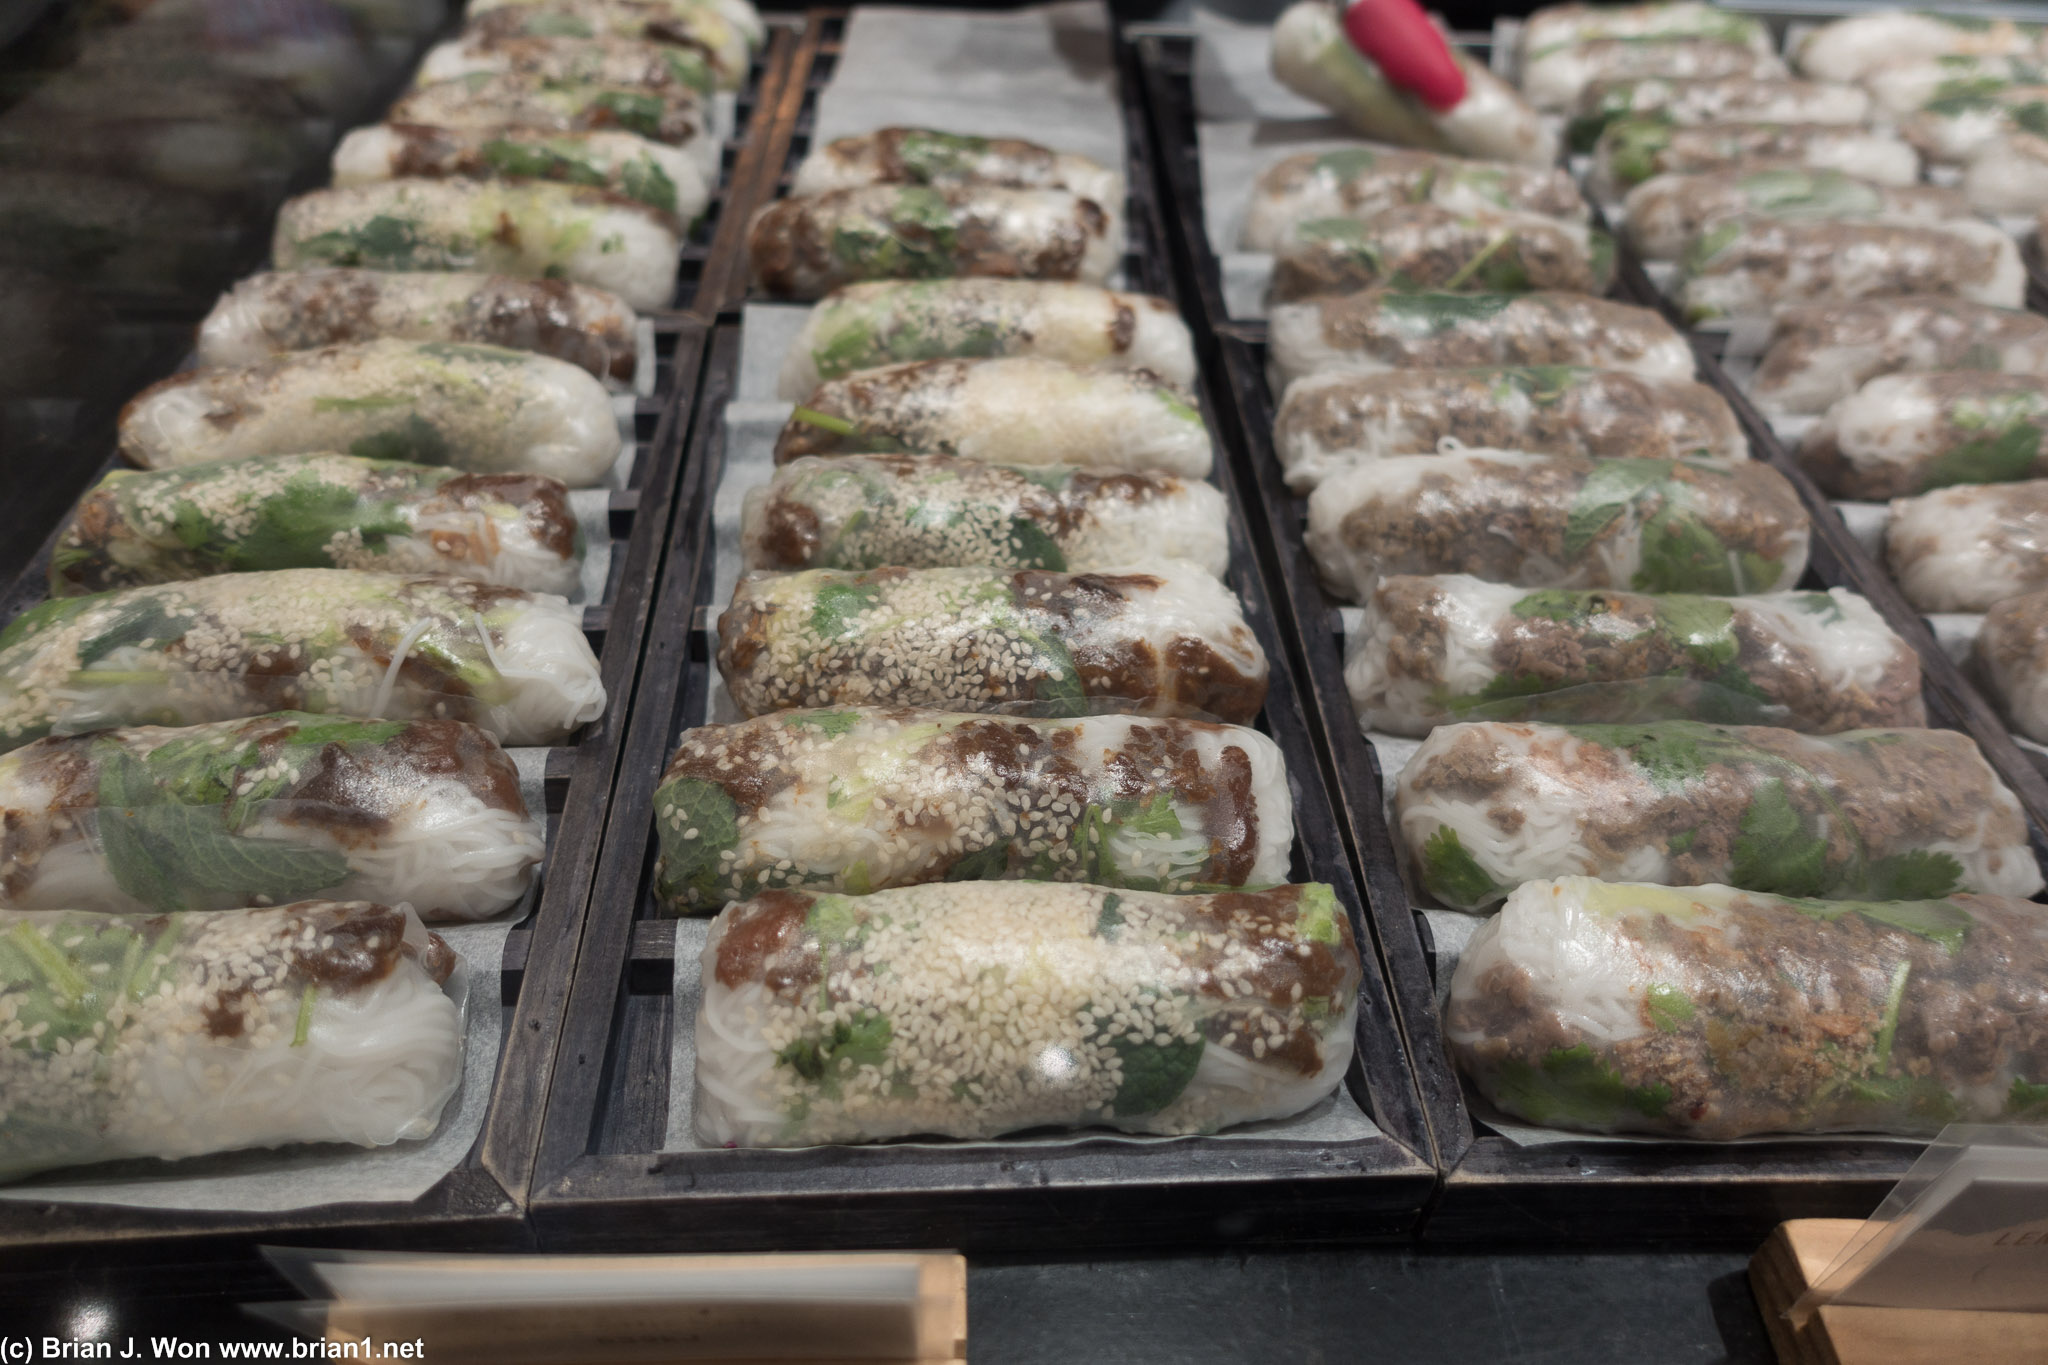 Trays and trays of fresh made spring rolls.